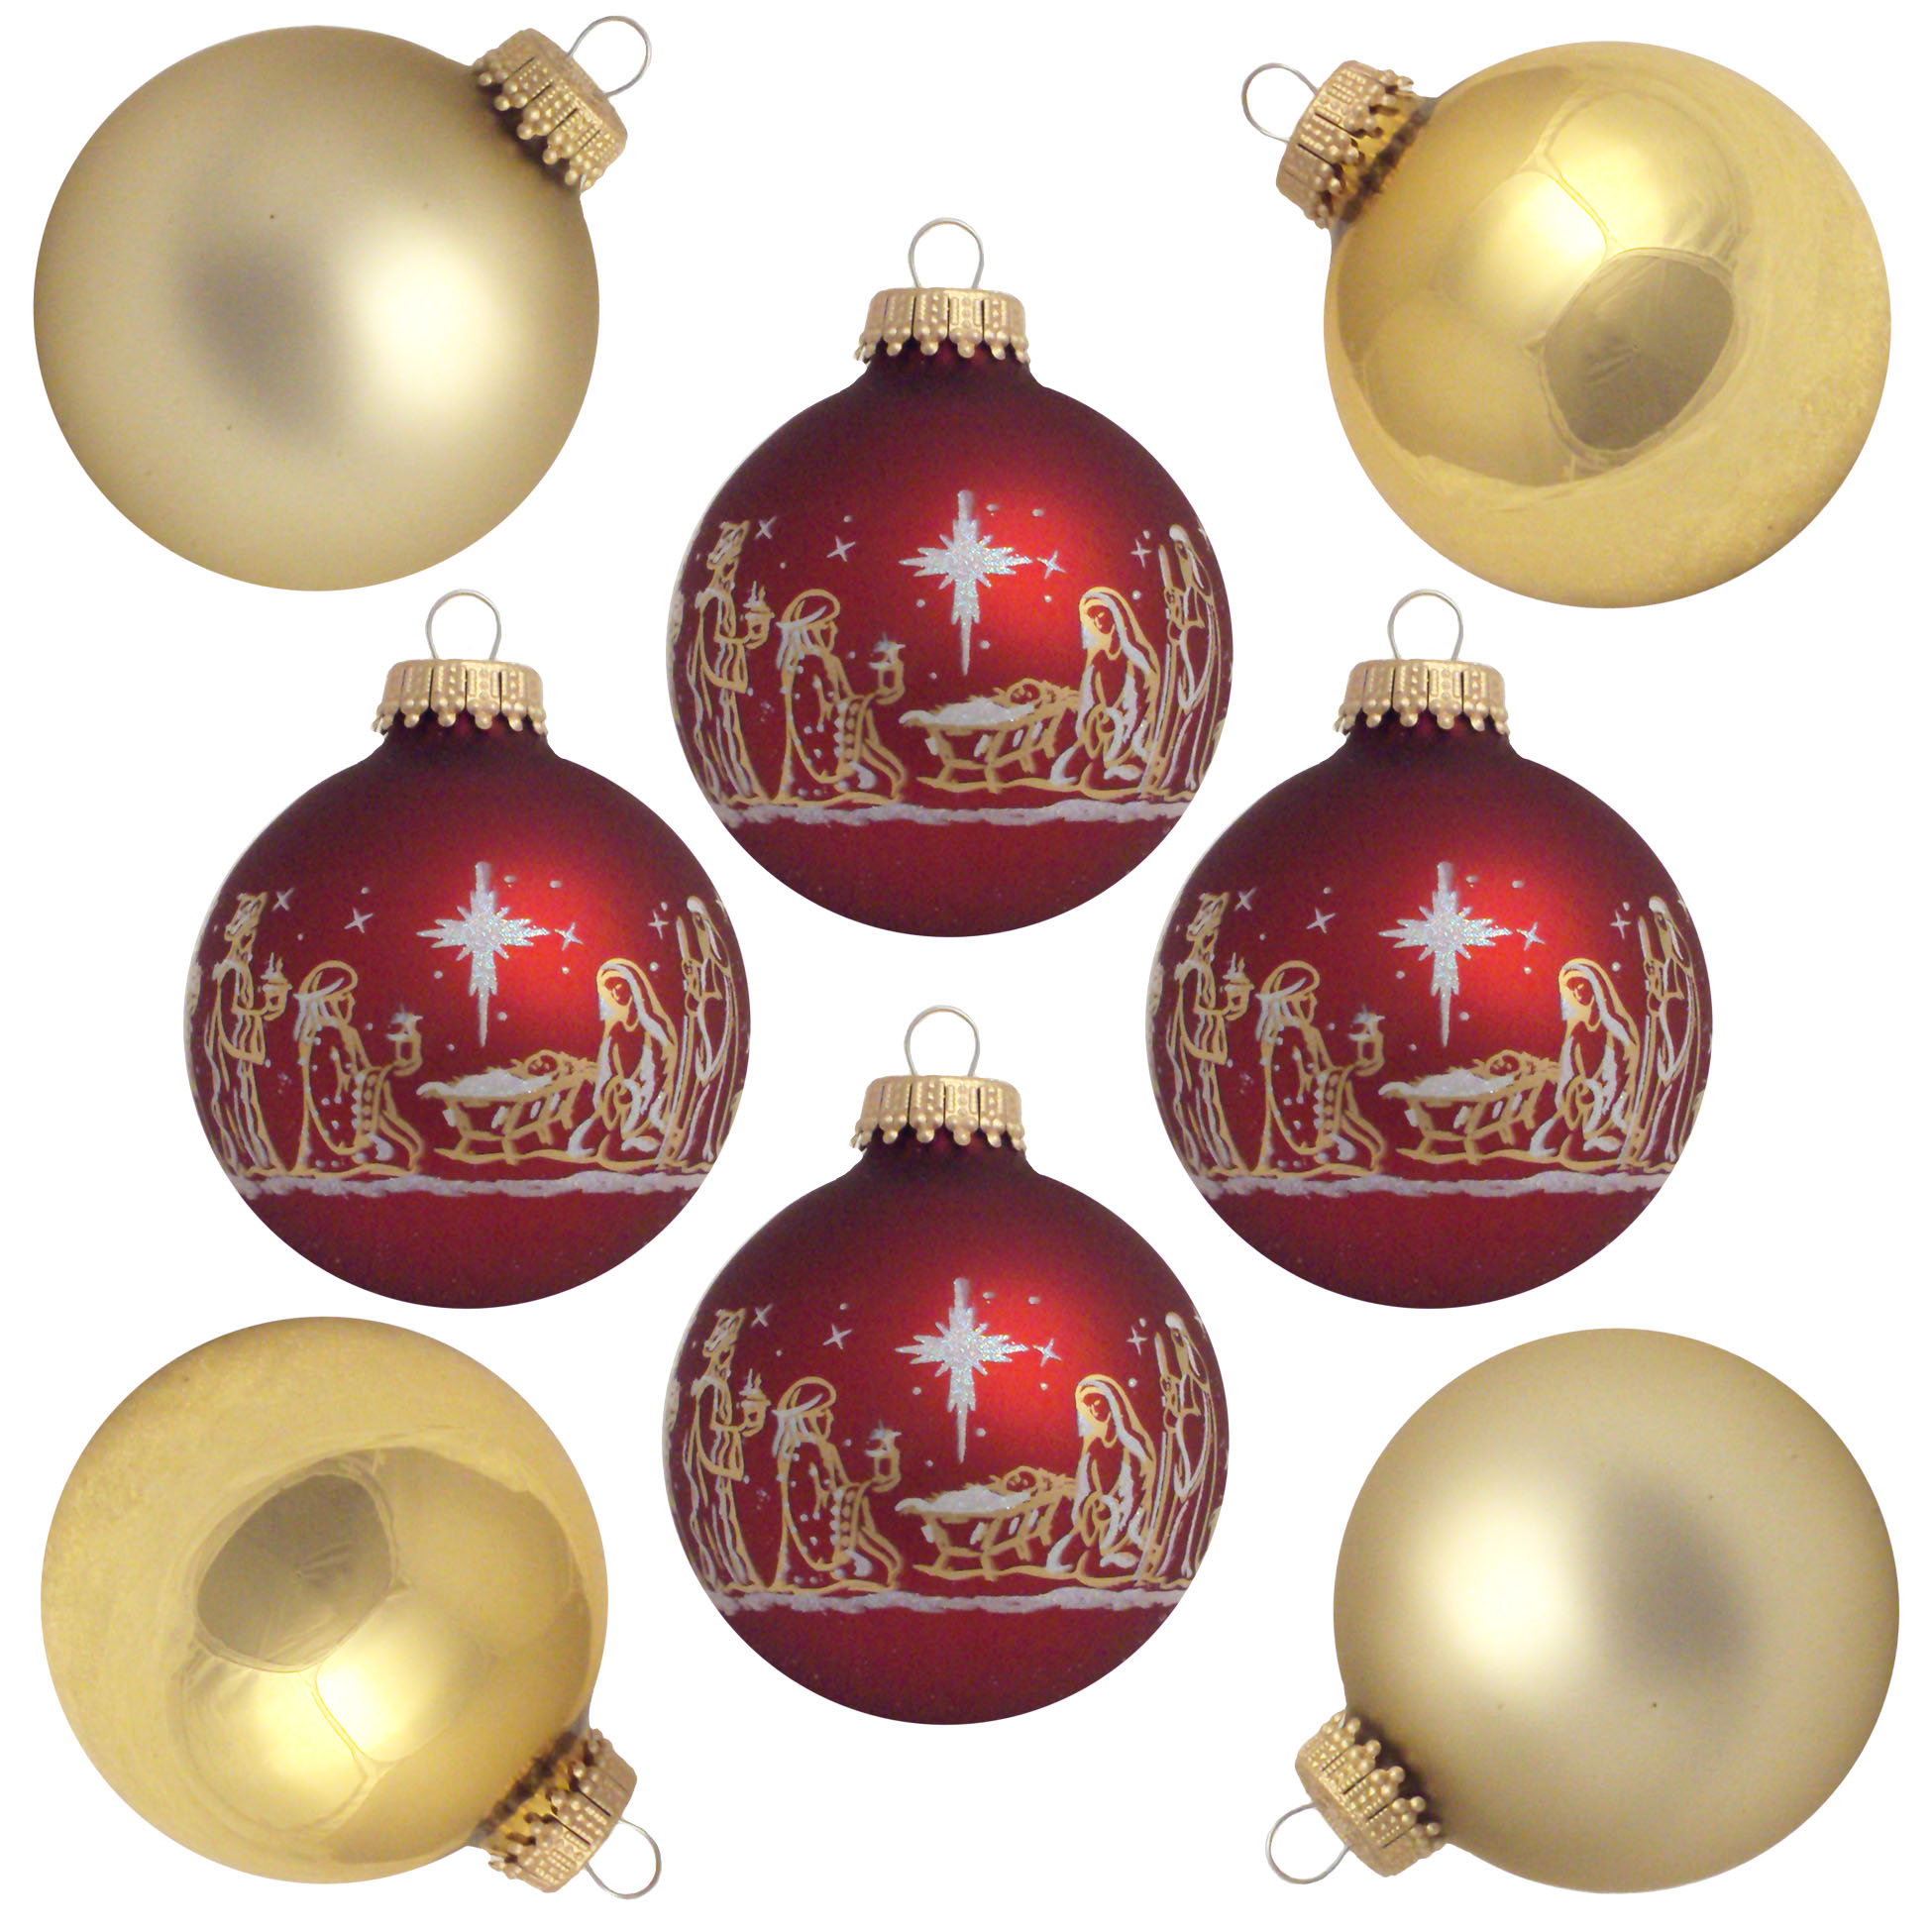 Christmas by Krebs Glass Christmas Ornaments- 8 ct. Gold and Silver Nativity Scene